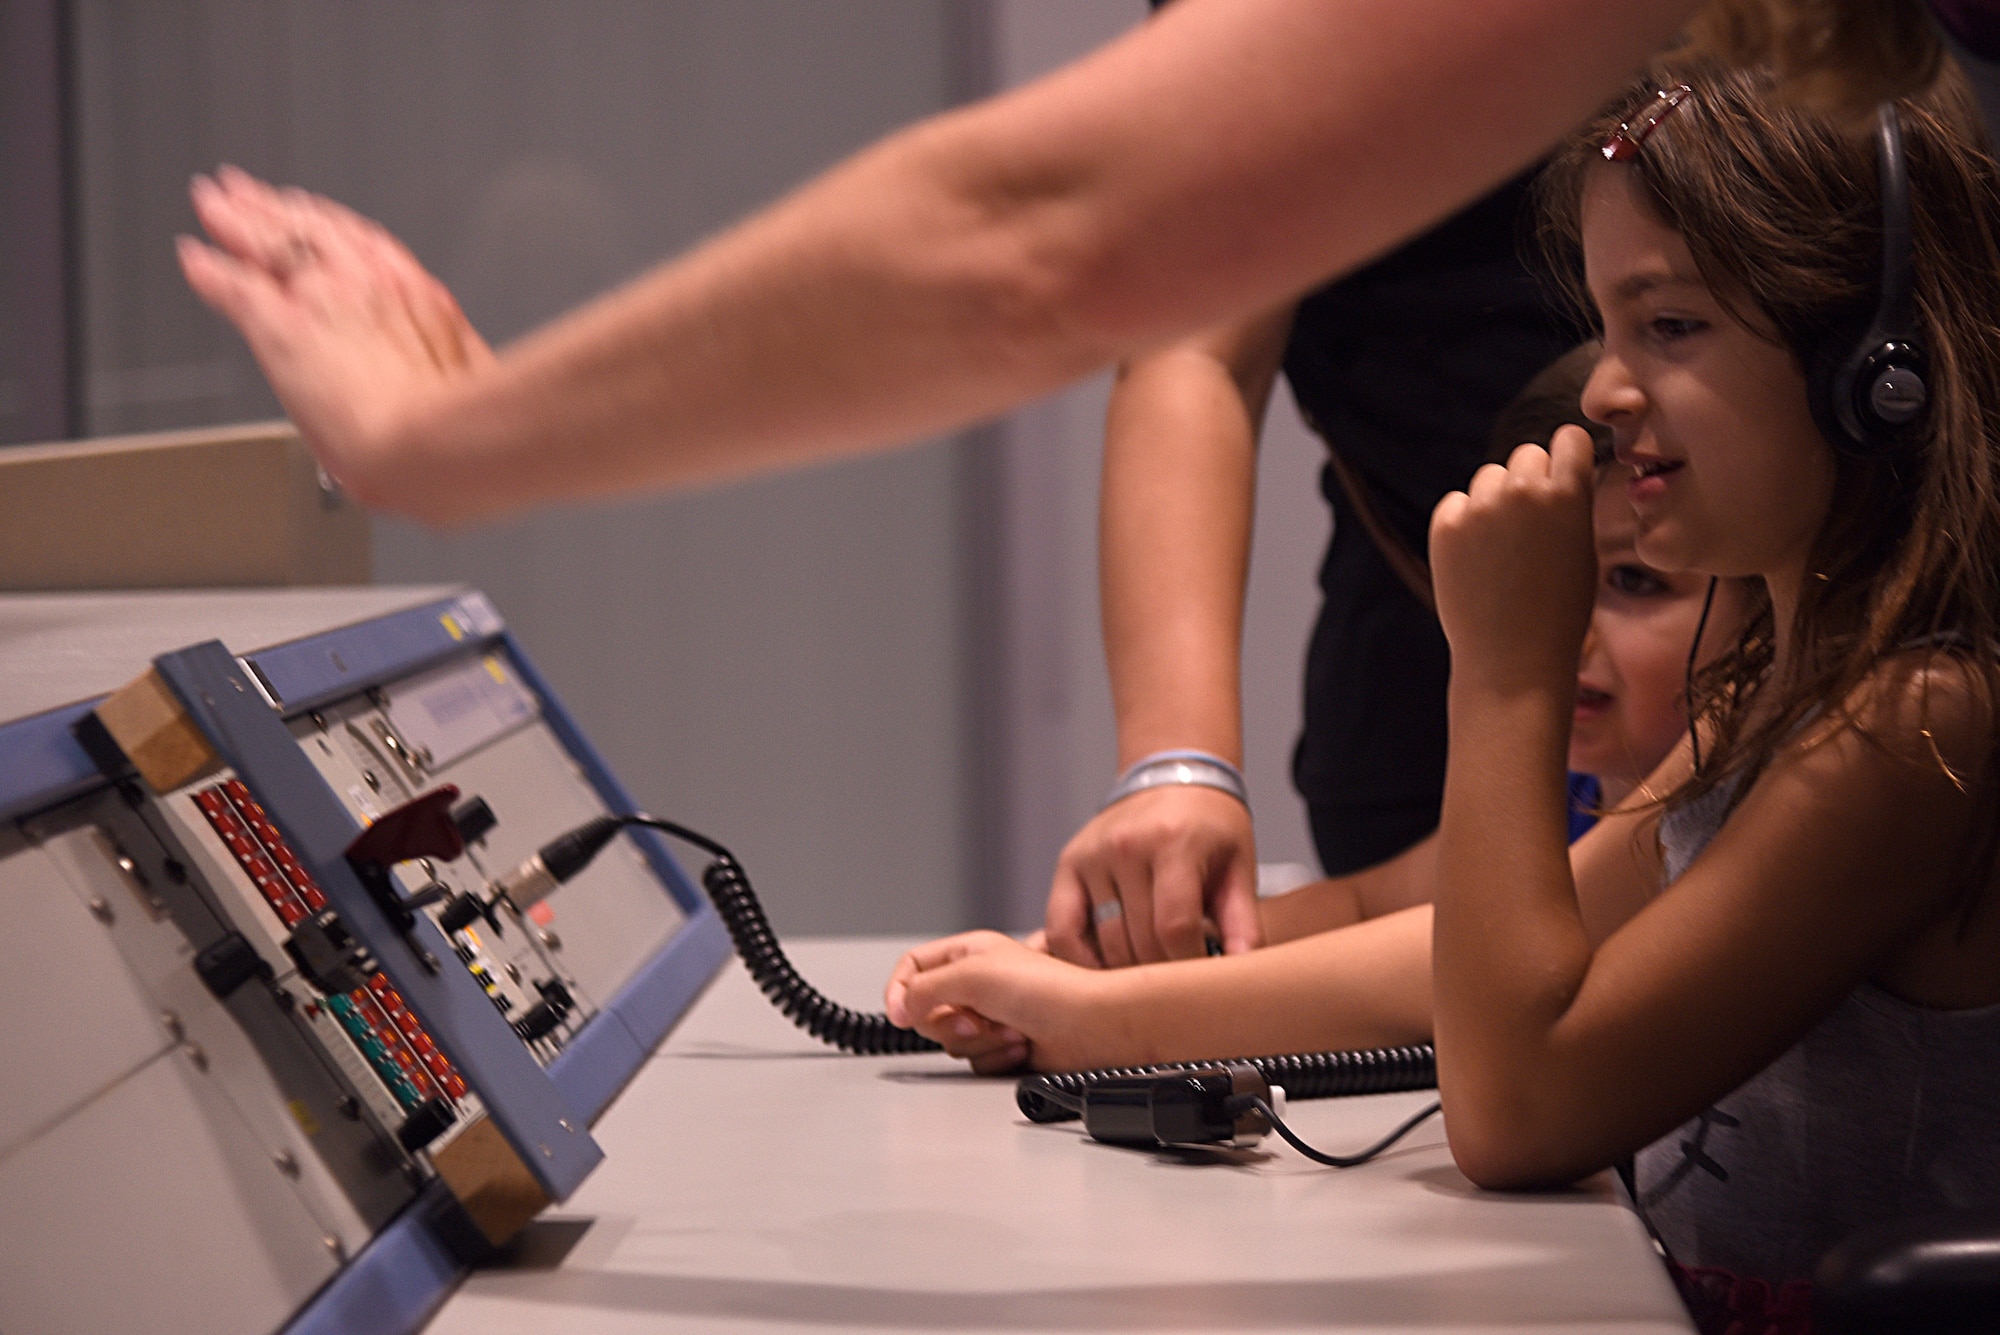 Samantha and her brother Enzo learn about the Morrell Operations Center; a center for launch command and control operations, during the 45th Space Wing Family Day self guided tour of Cape Canaveral Air Force Station, Fla. on April 6, 2019.